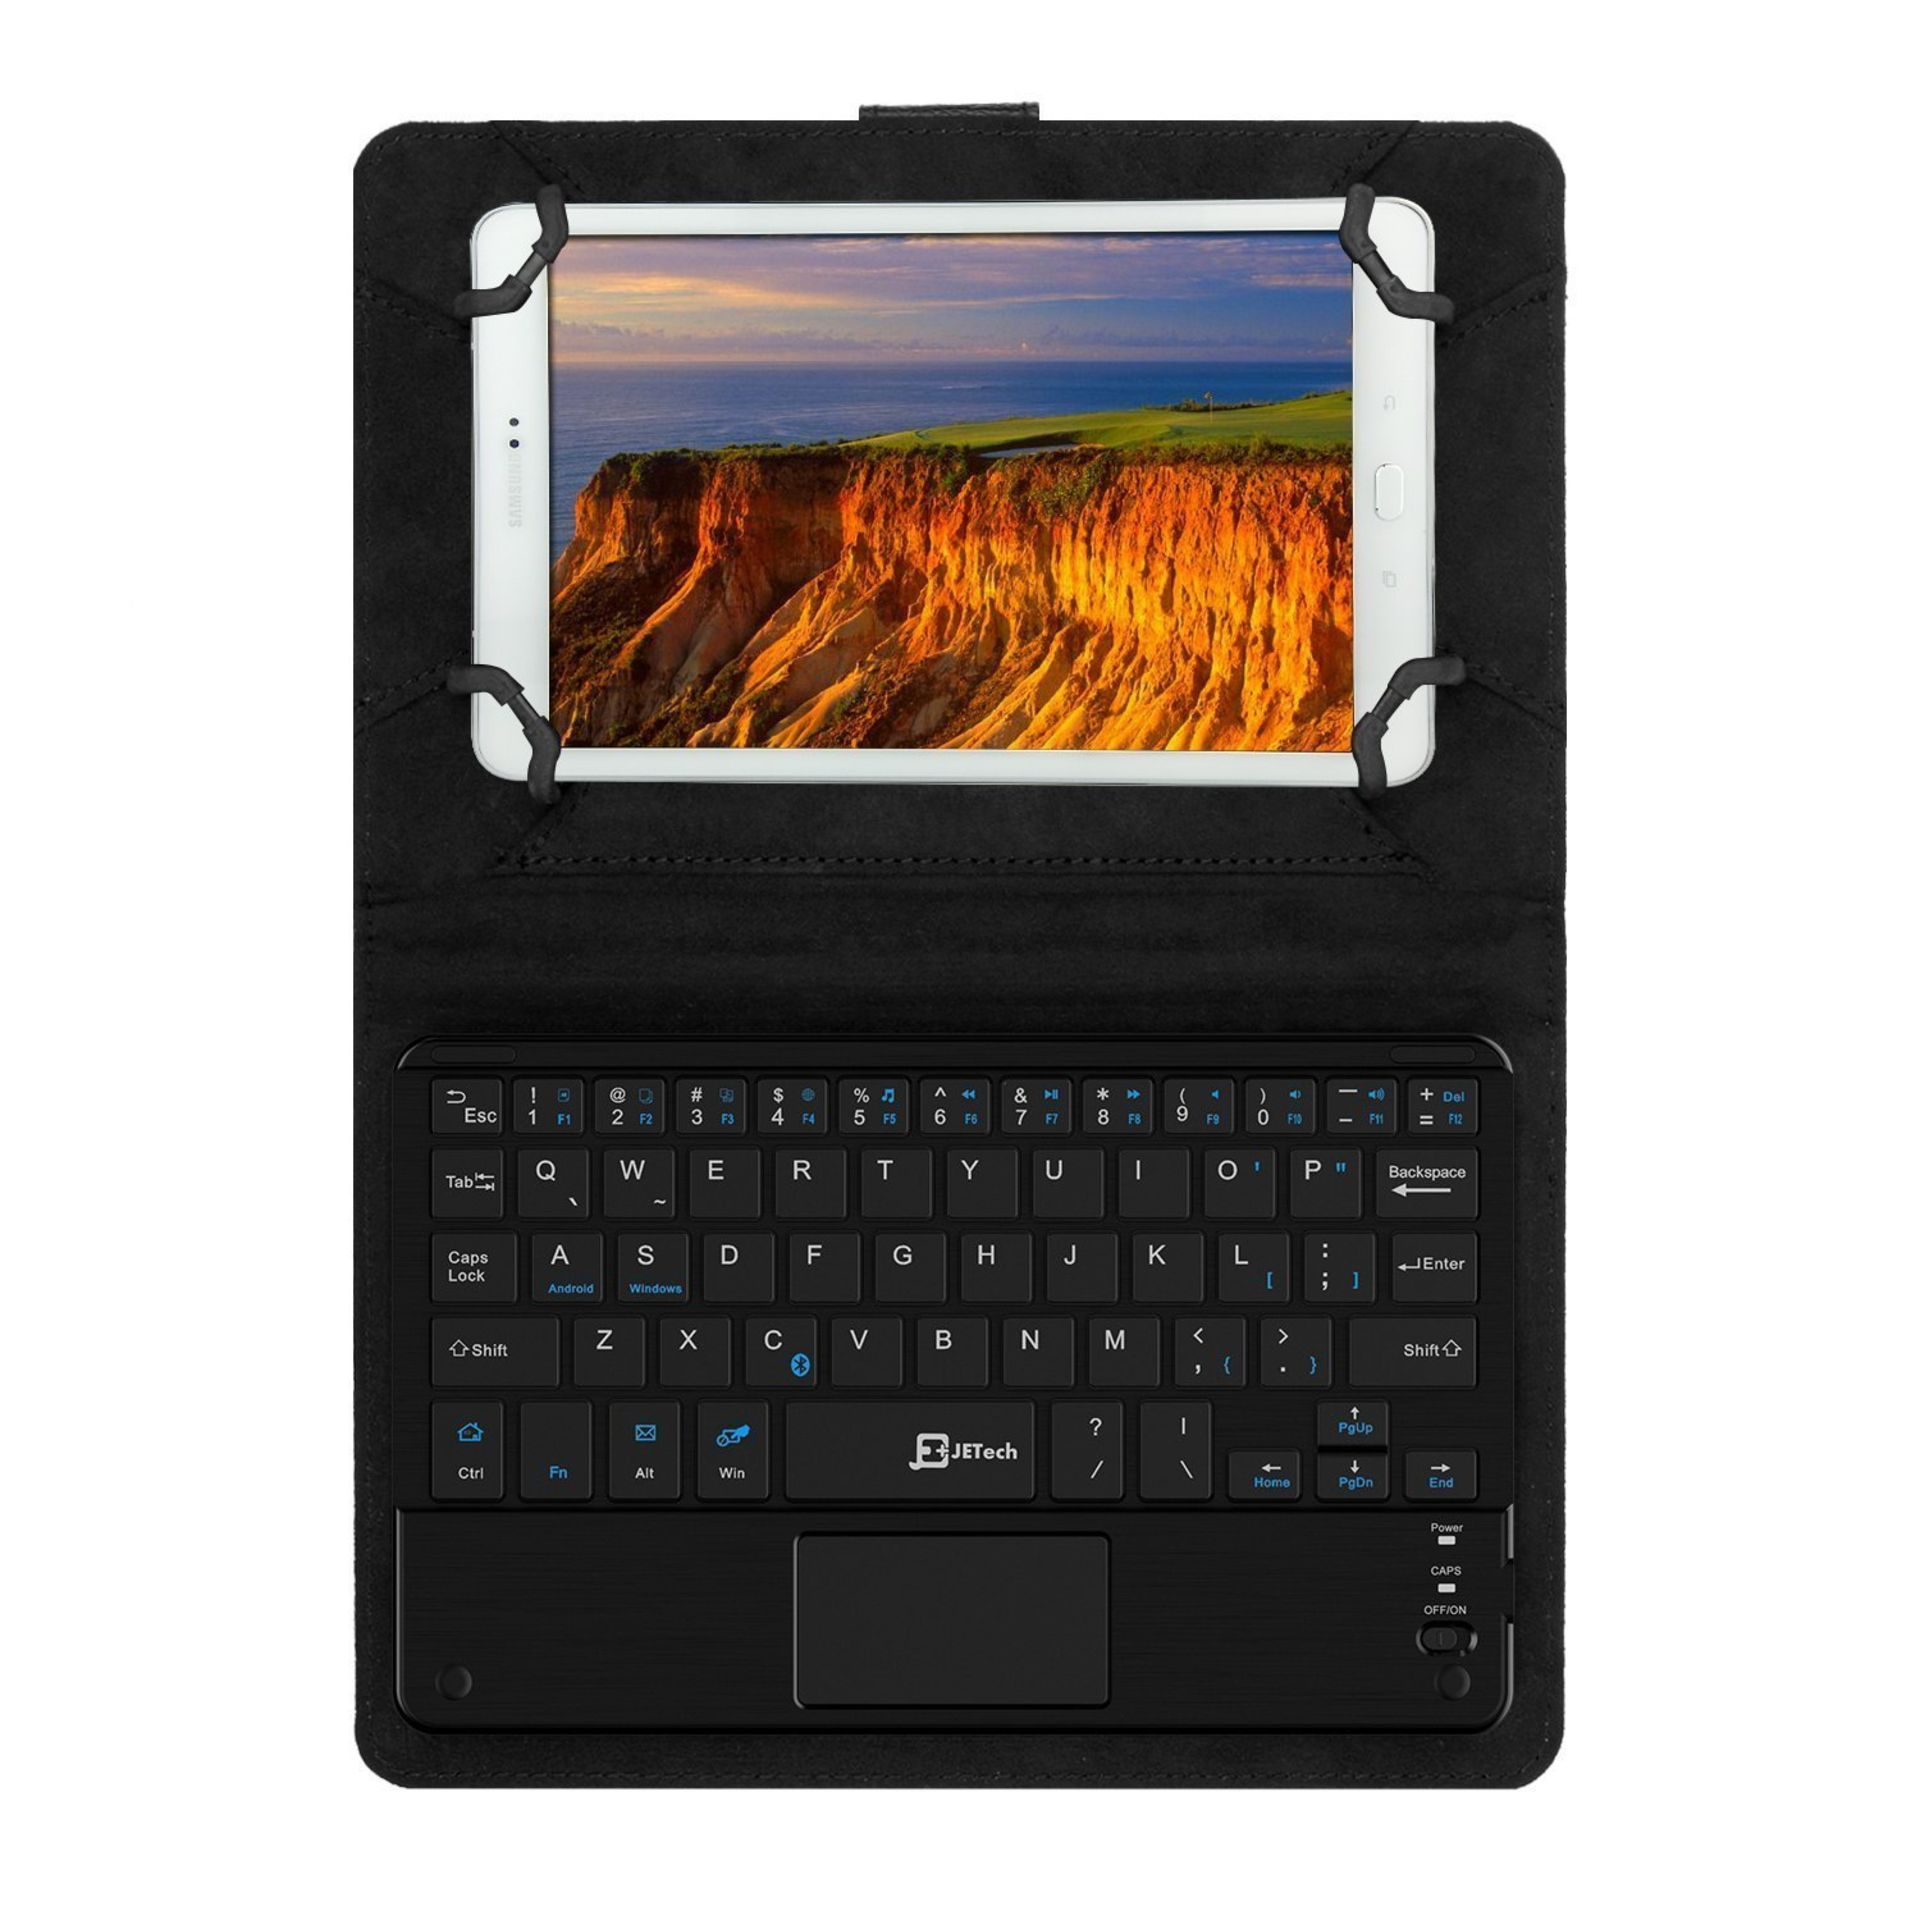 V Brand New Leather Bluetooth Keyboard Case For A Samsung 7-8" Tablet Amazon Price £14.95 X 2 YOUR